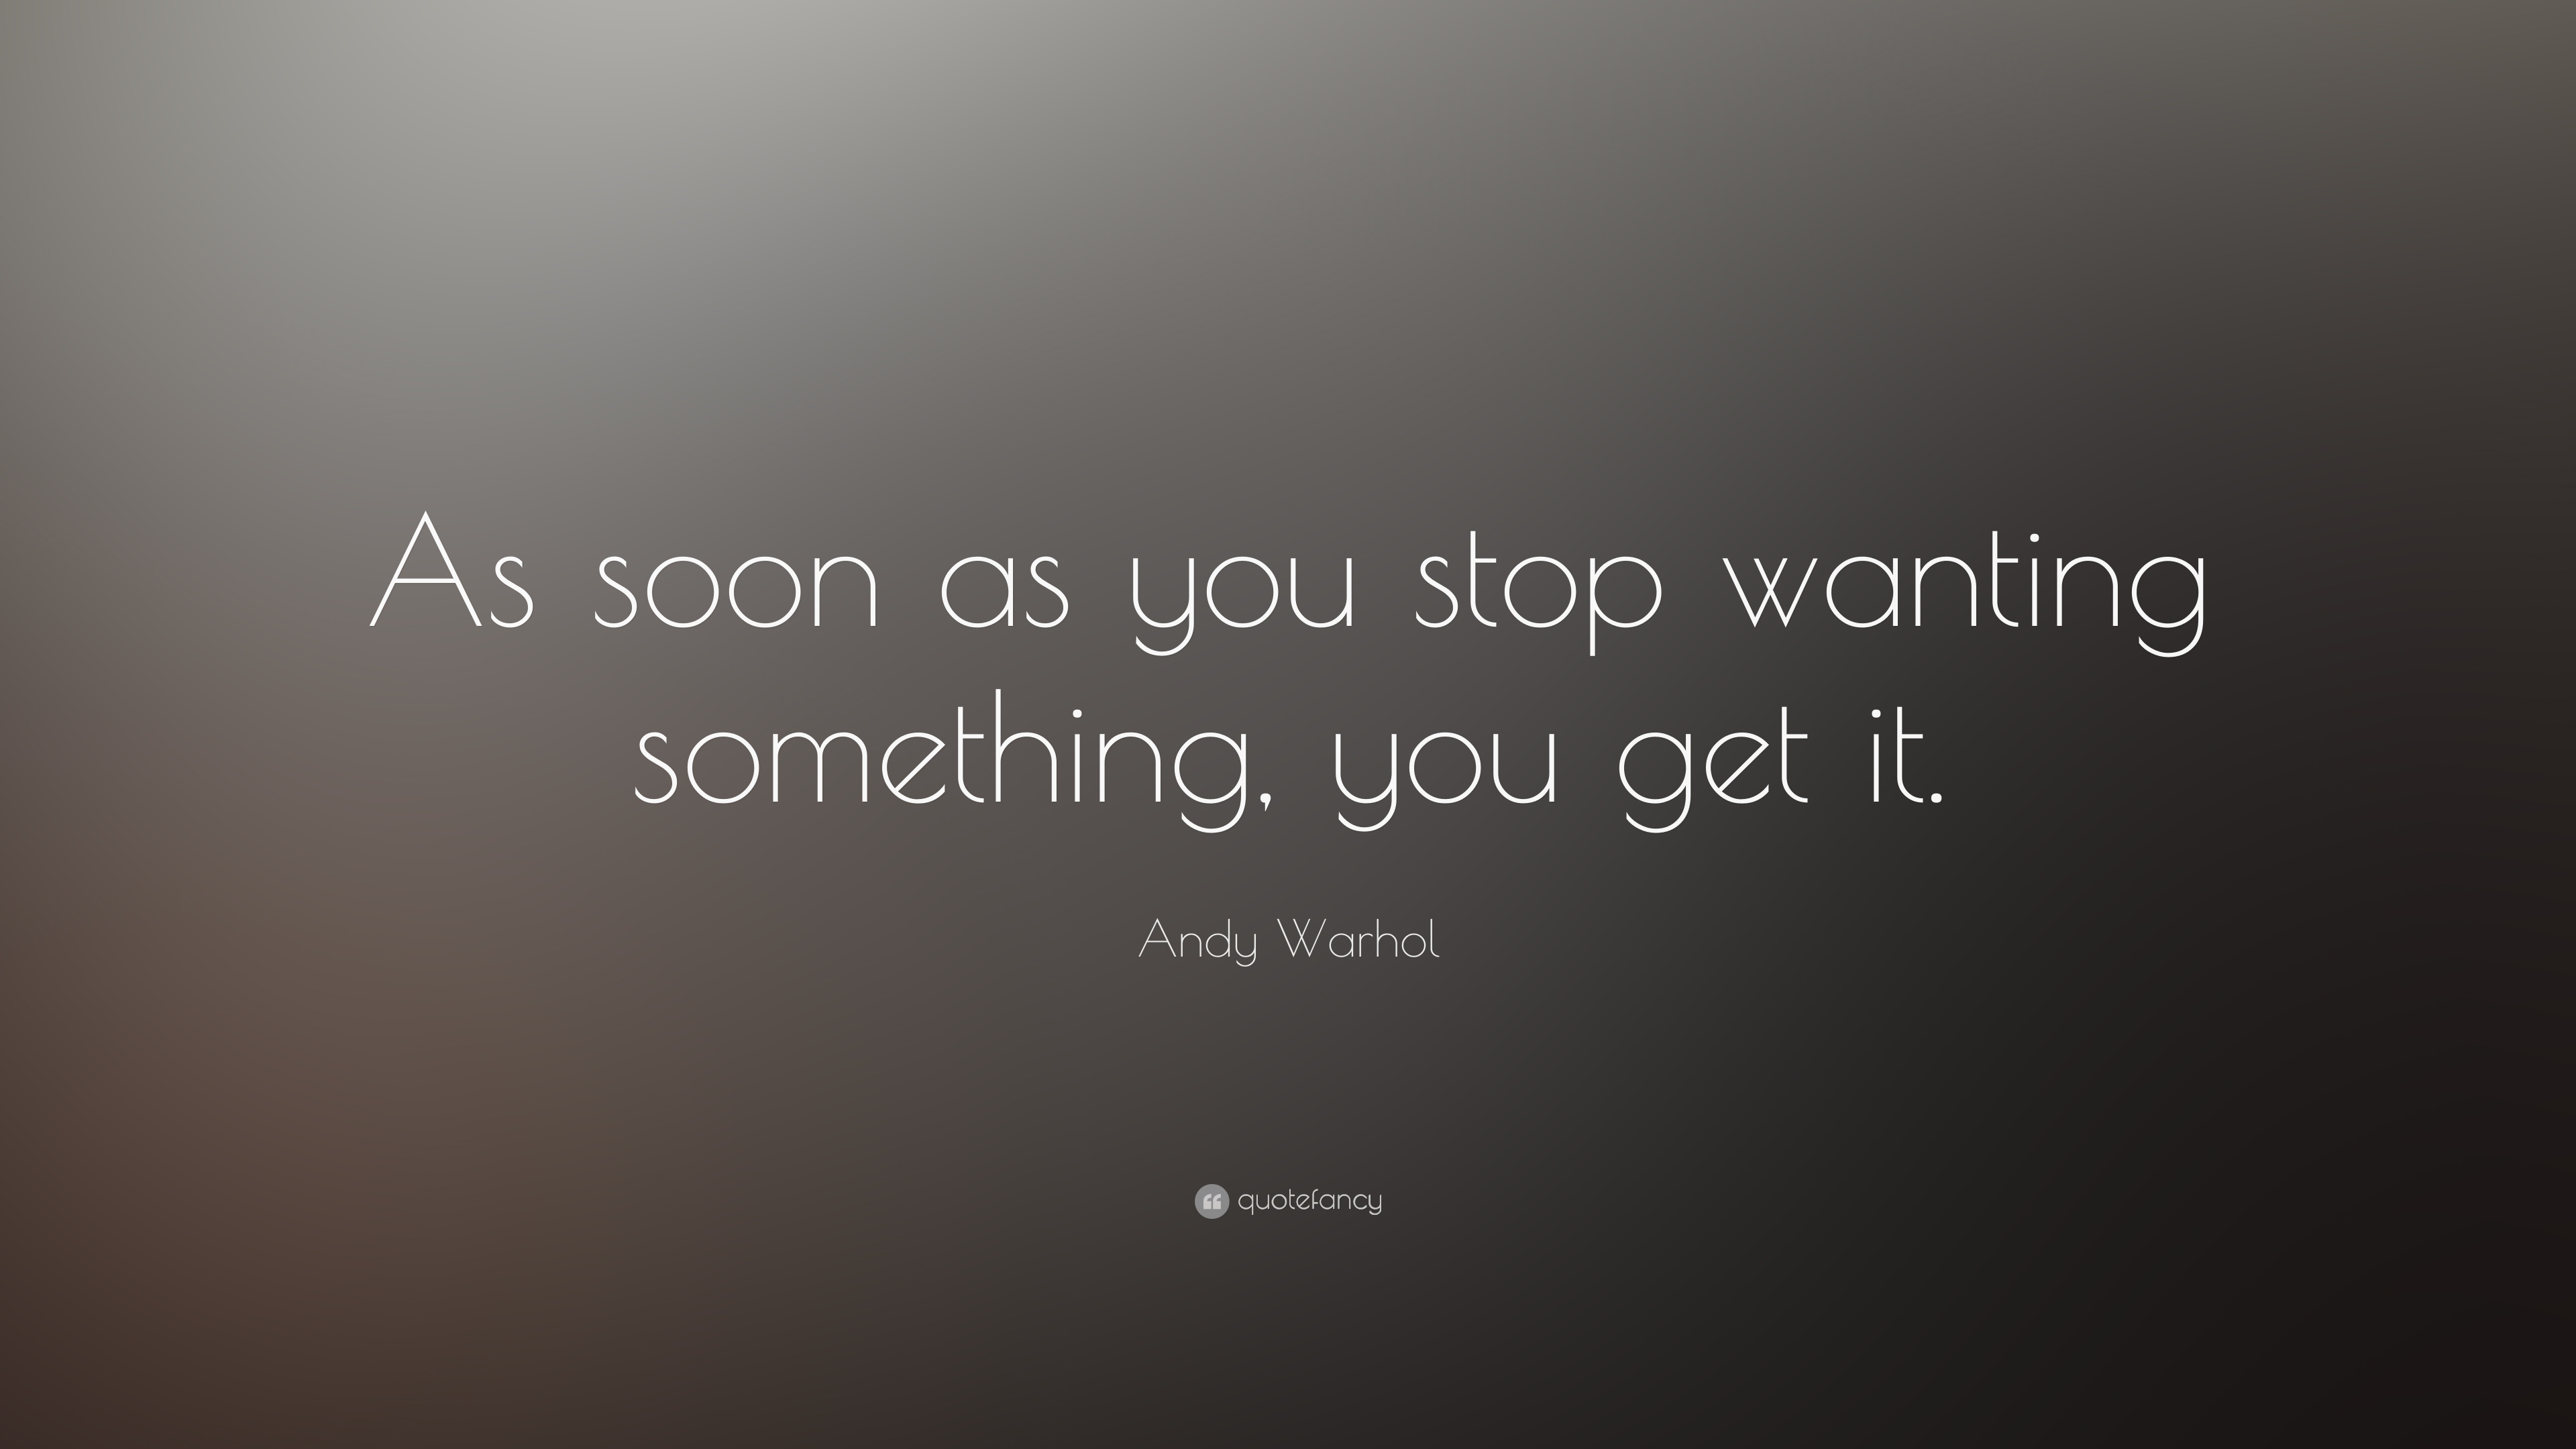 Andy Warhol Quotes (10 wallpapers) - Quotefancy